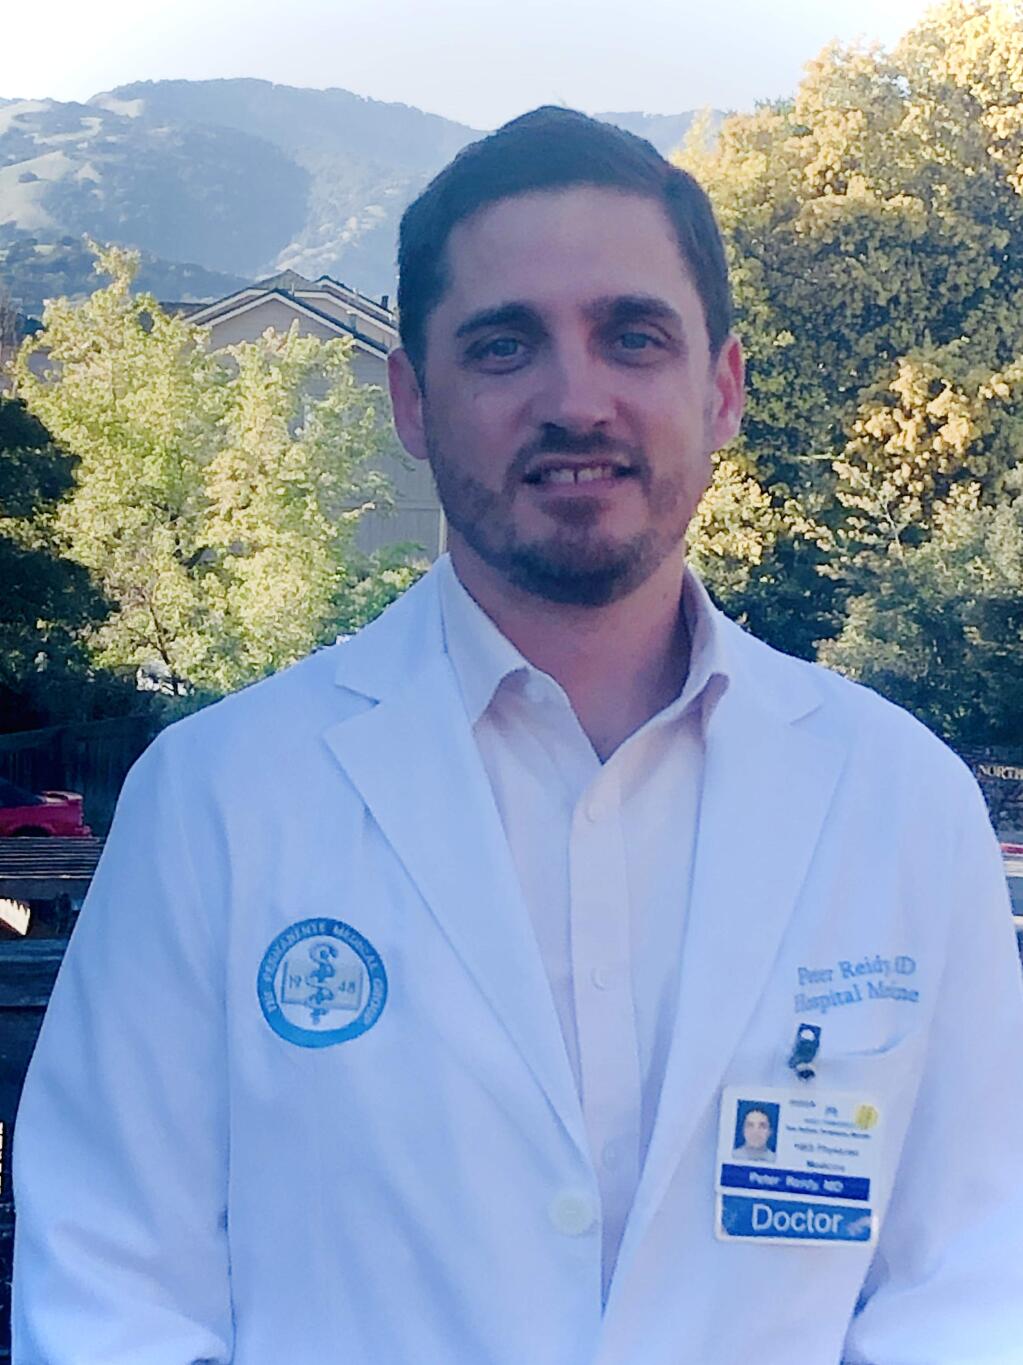 Peter Reidy, M.D., 39, chief of skilled nursing facility medicine, Kaiser Permanente San Rafael Medical Center, is a 2020 Forty Under 40 winner. (courtesy photo)